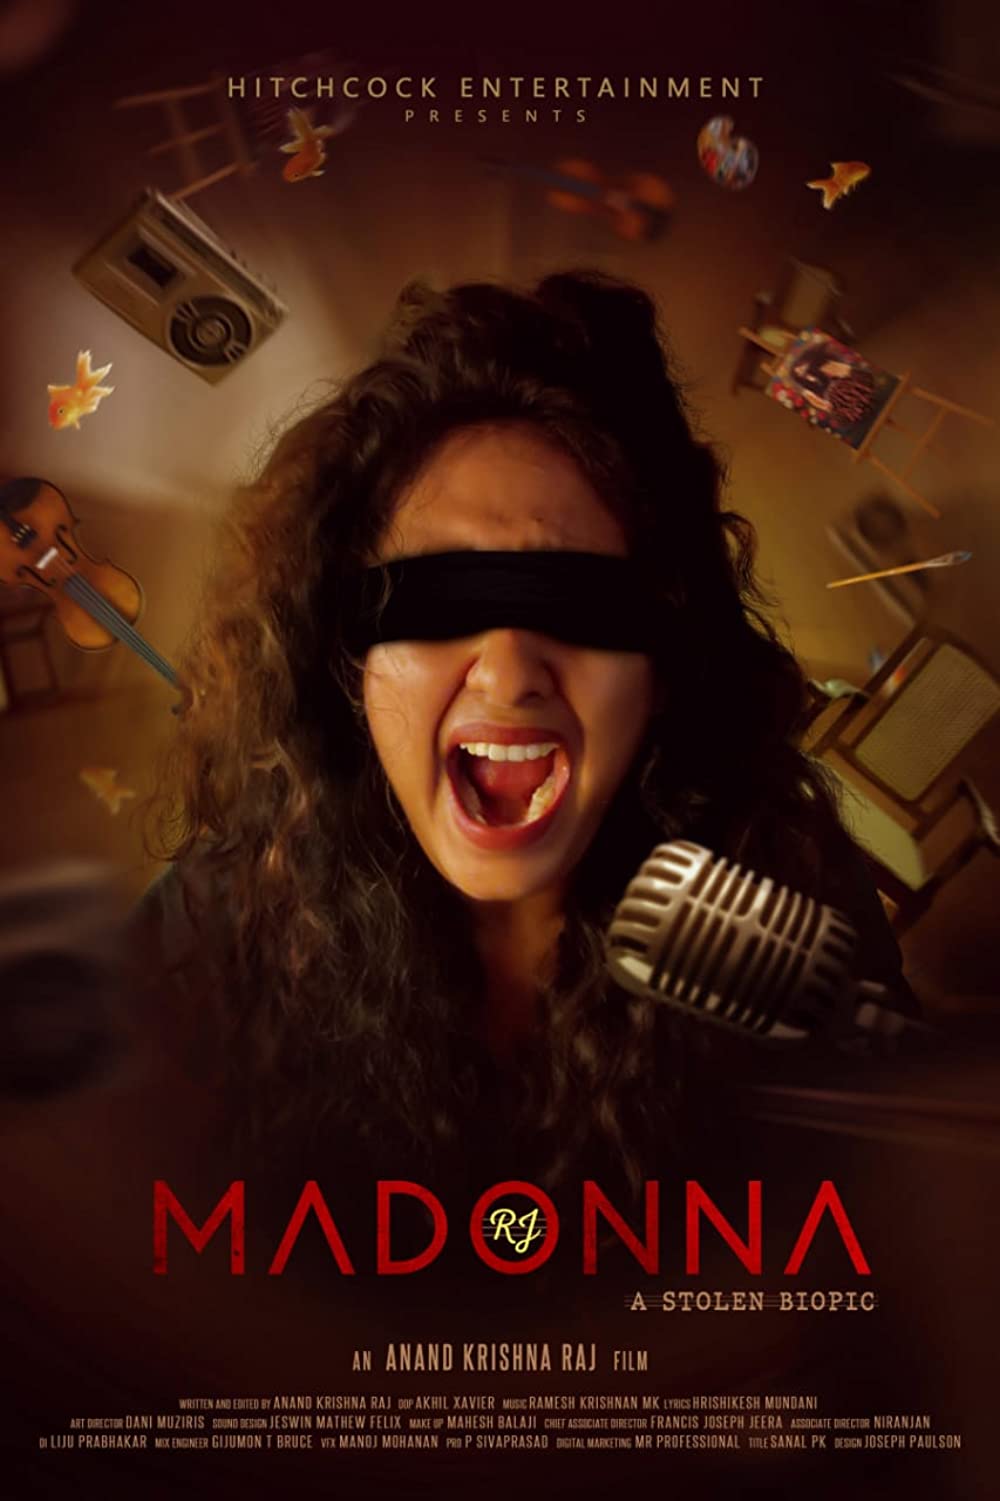 RJ Madonna 2021 Hindi Dubbed (Unofficial) 1080p HDRip 1.3GB Download